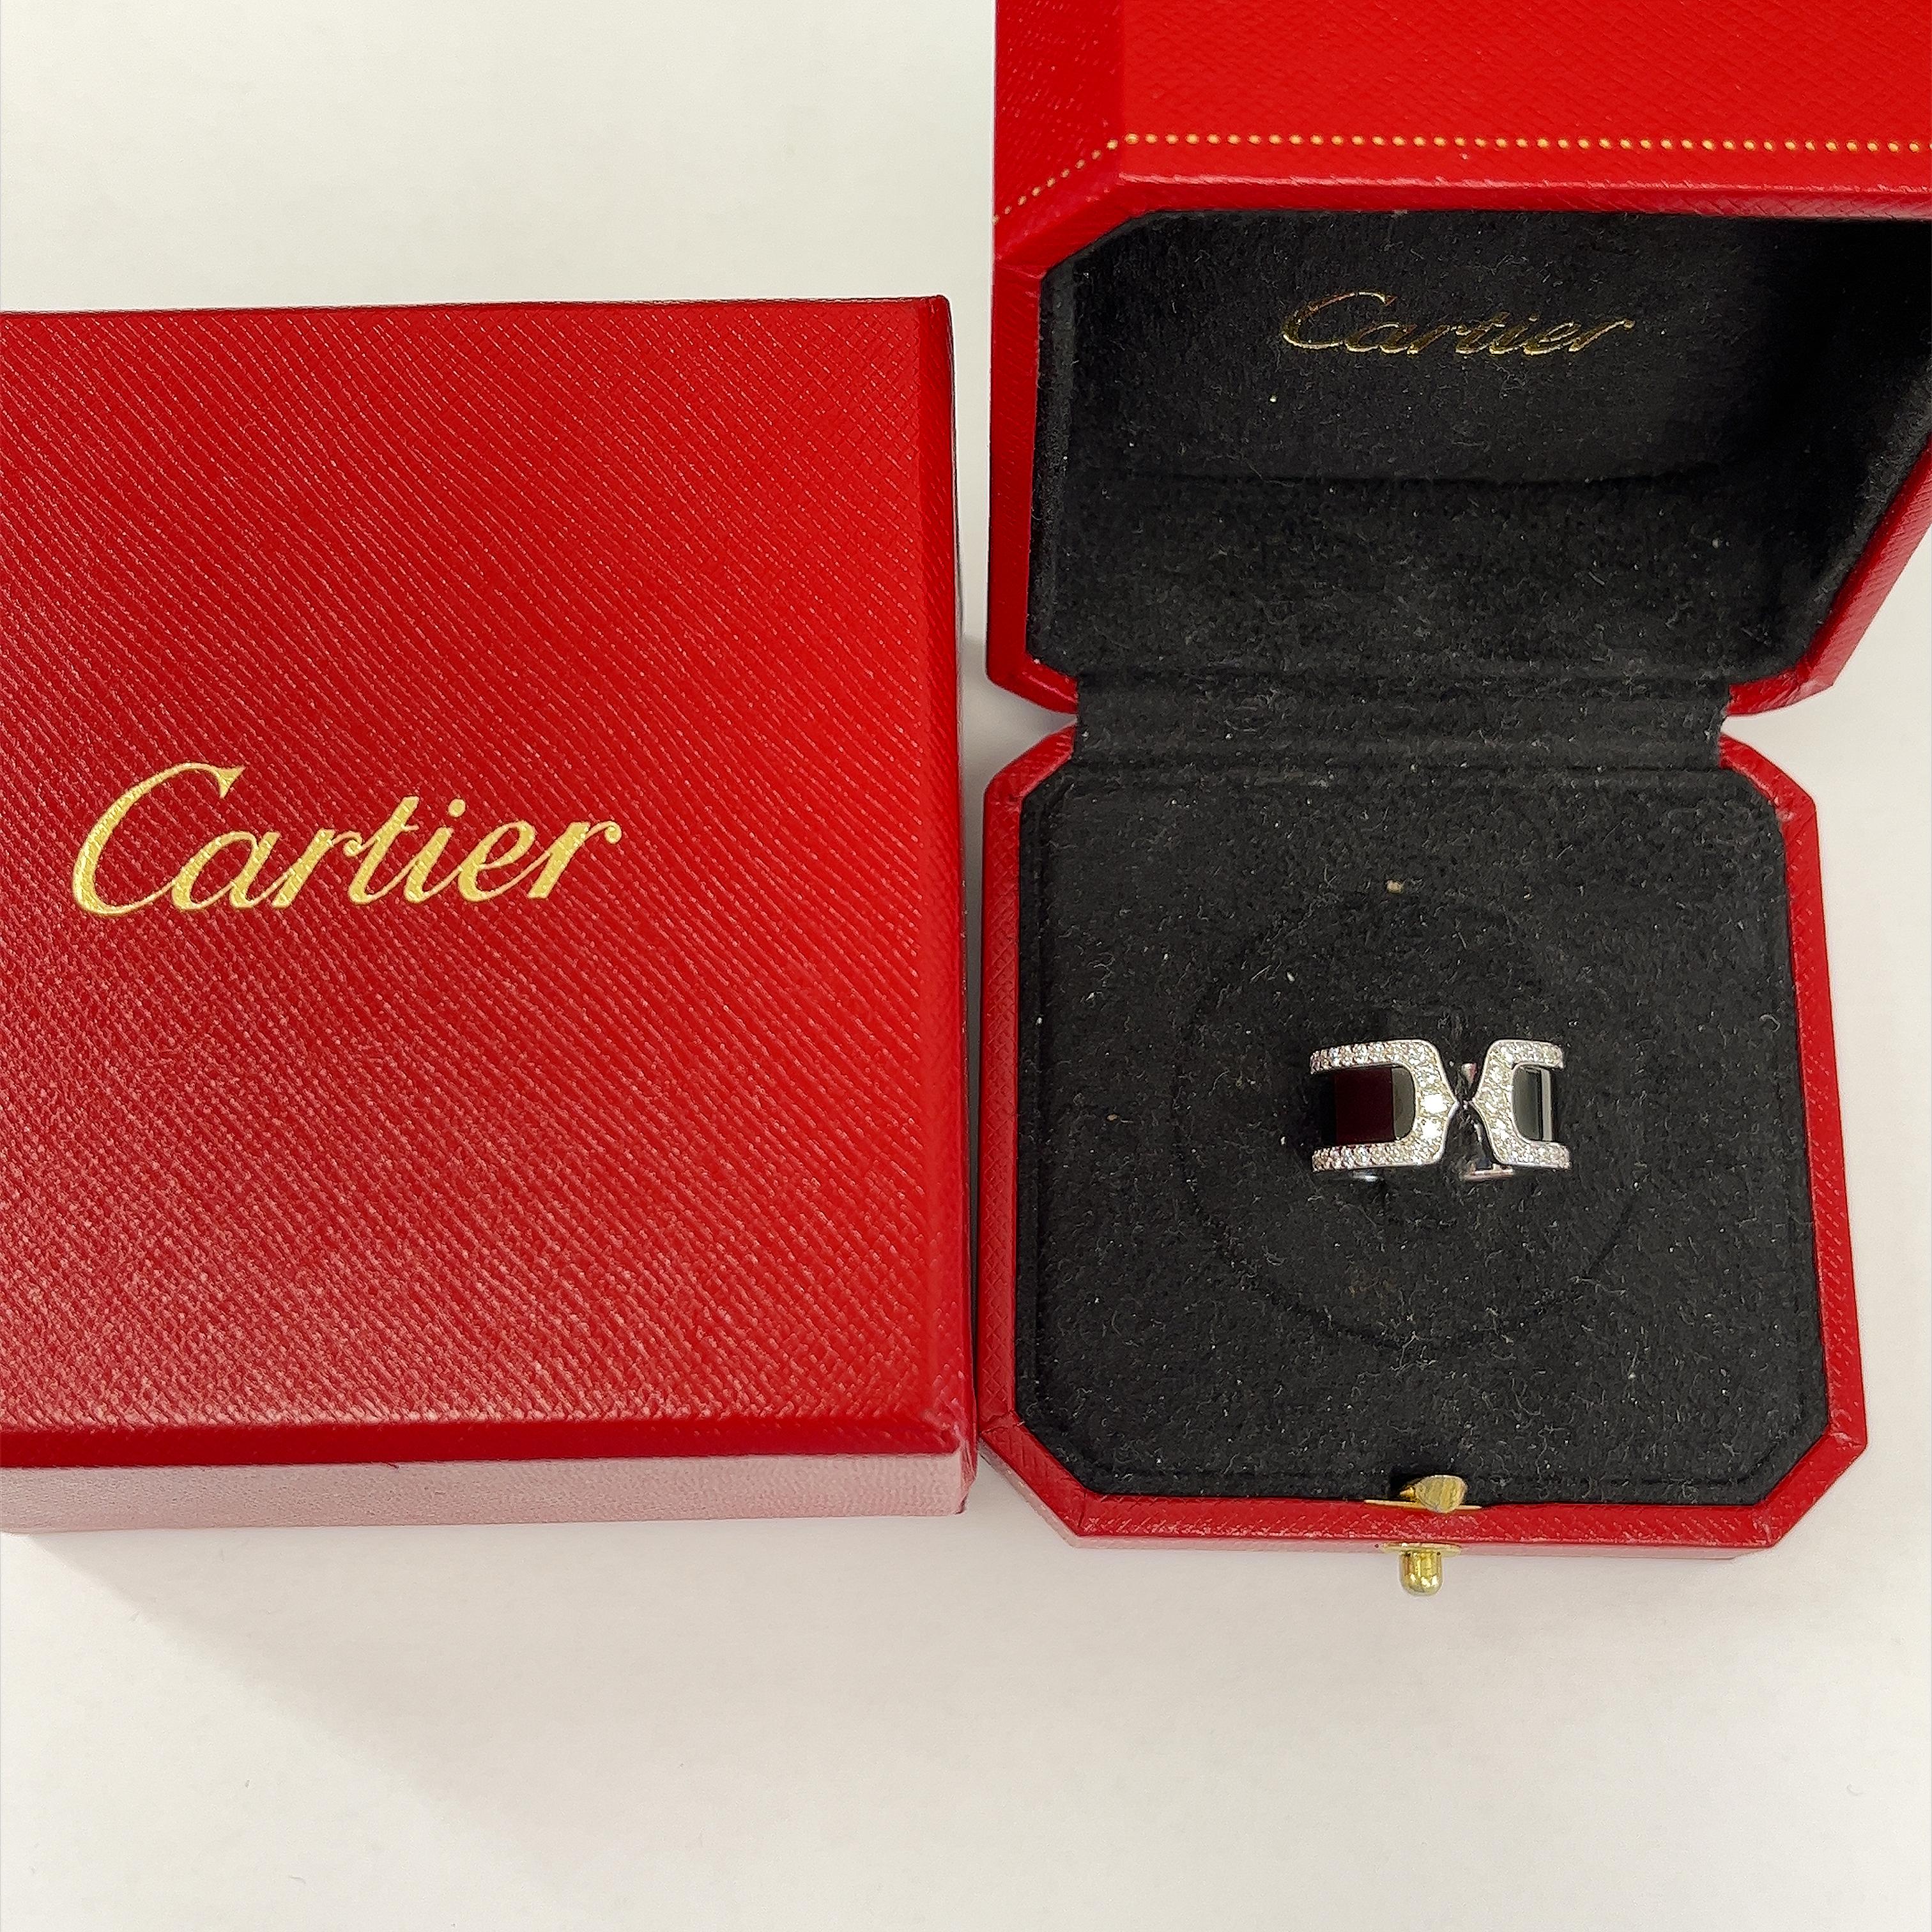 Cartier Logo Double C De Cartier ring in 18ct white gold diamond lady Angel kiss For Sale 1